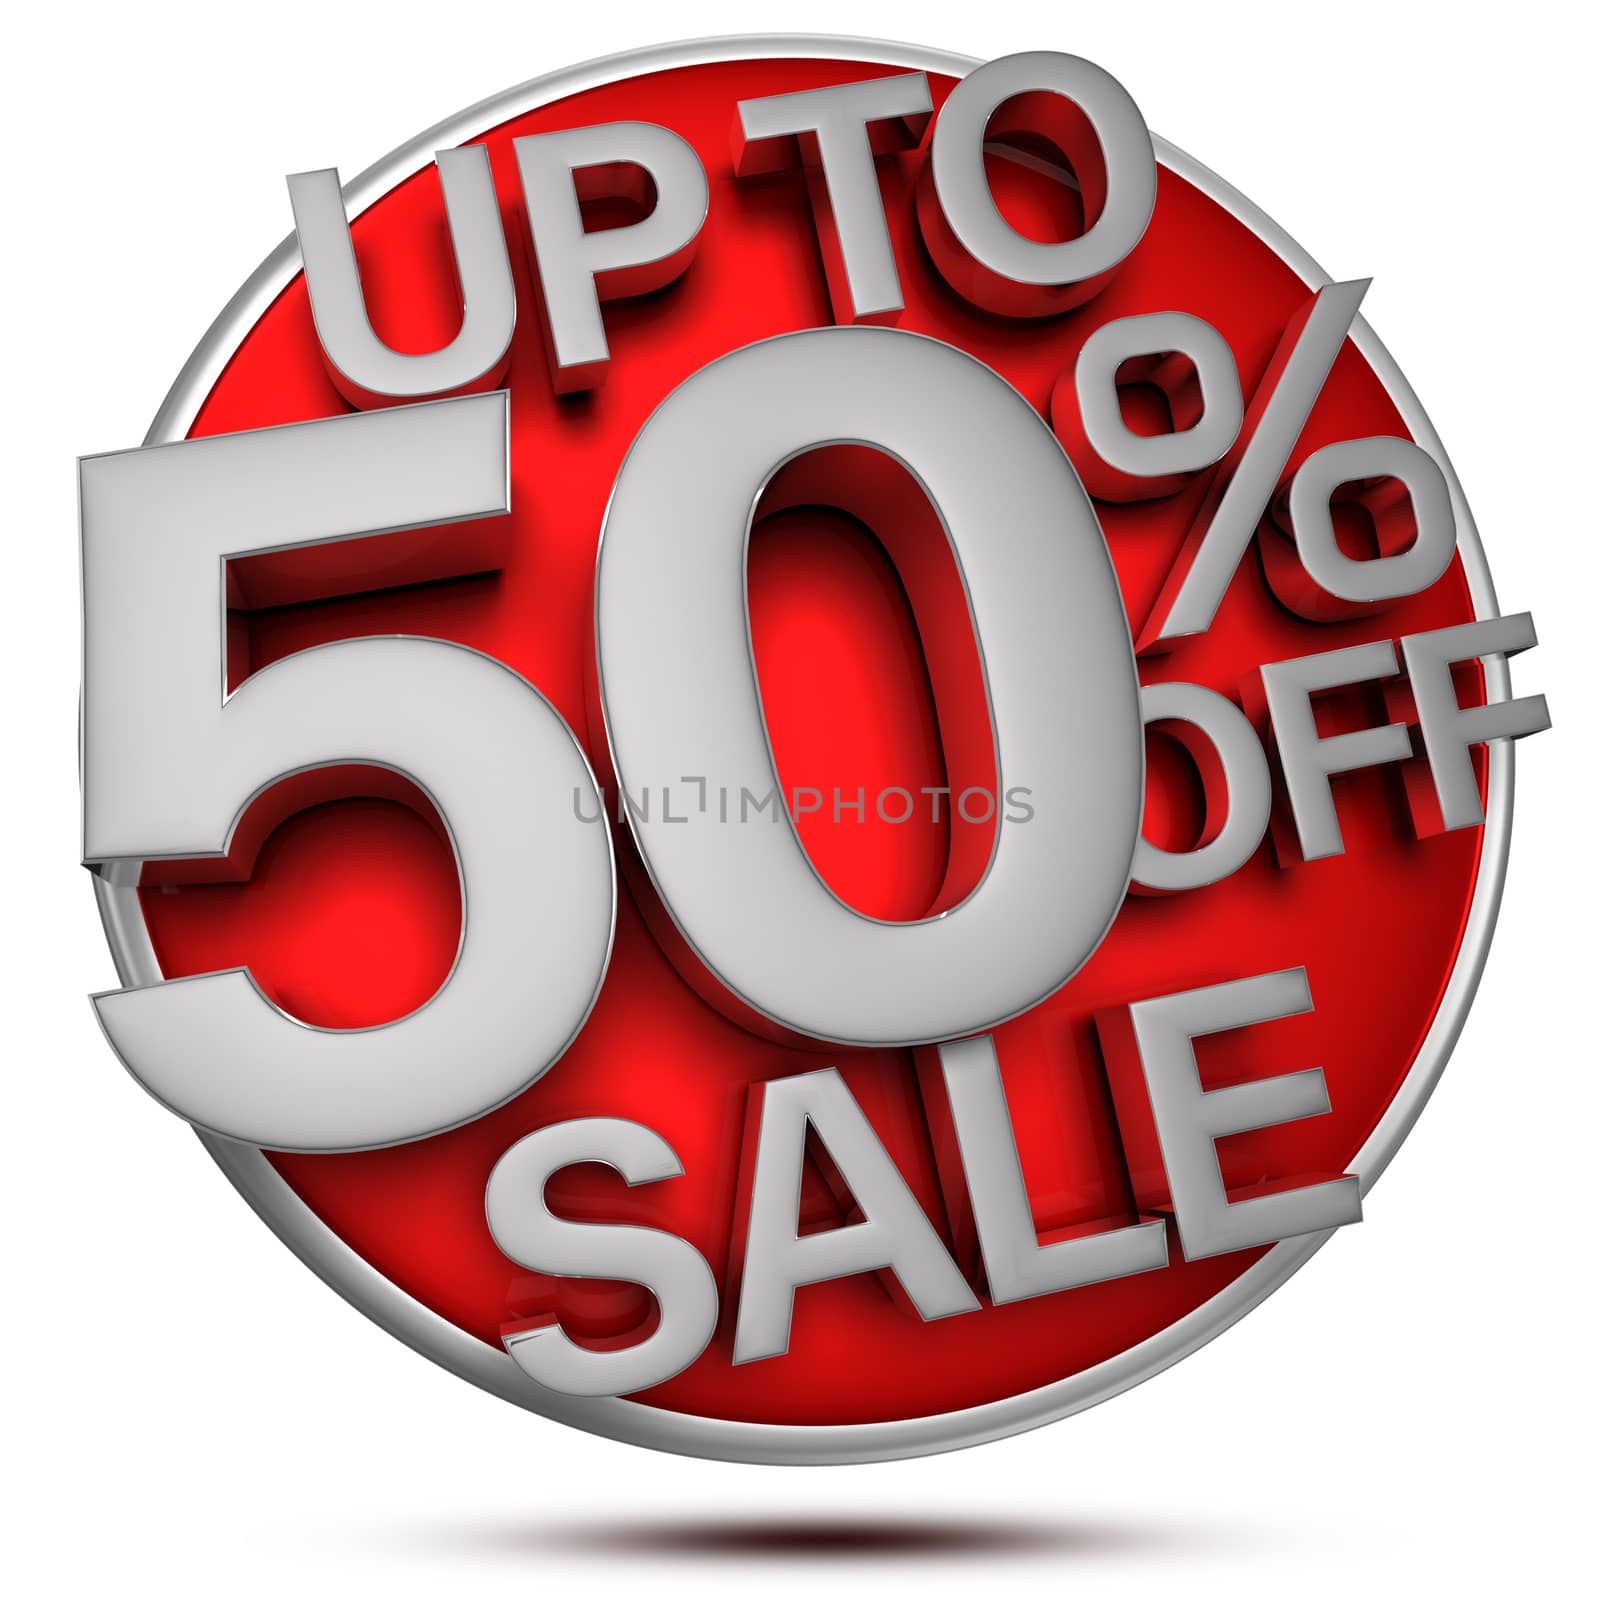 Up to 50 percent off sale 3d rendering on white background.(with Clipping Path).